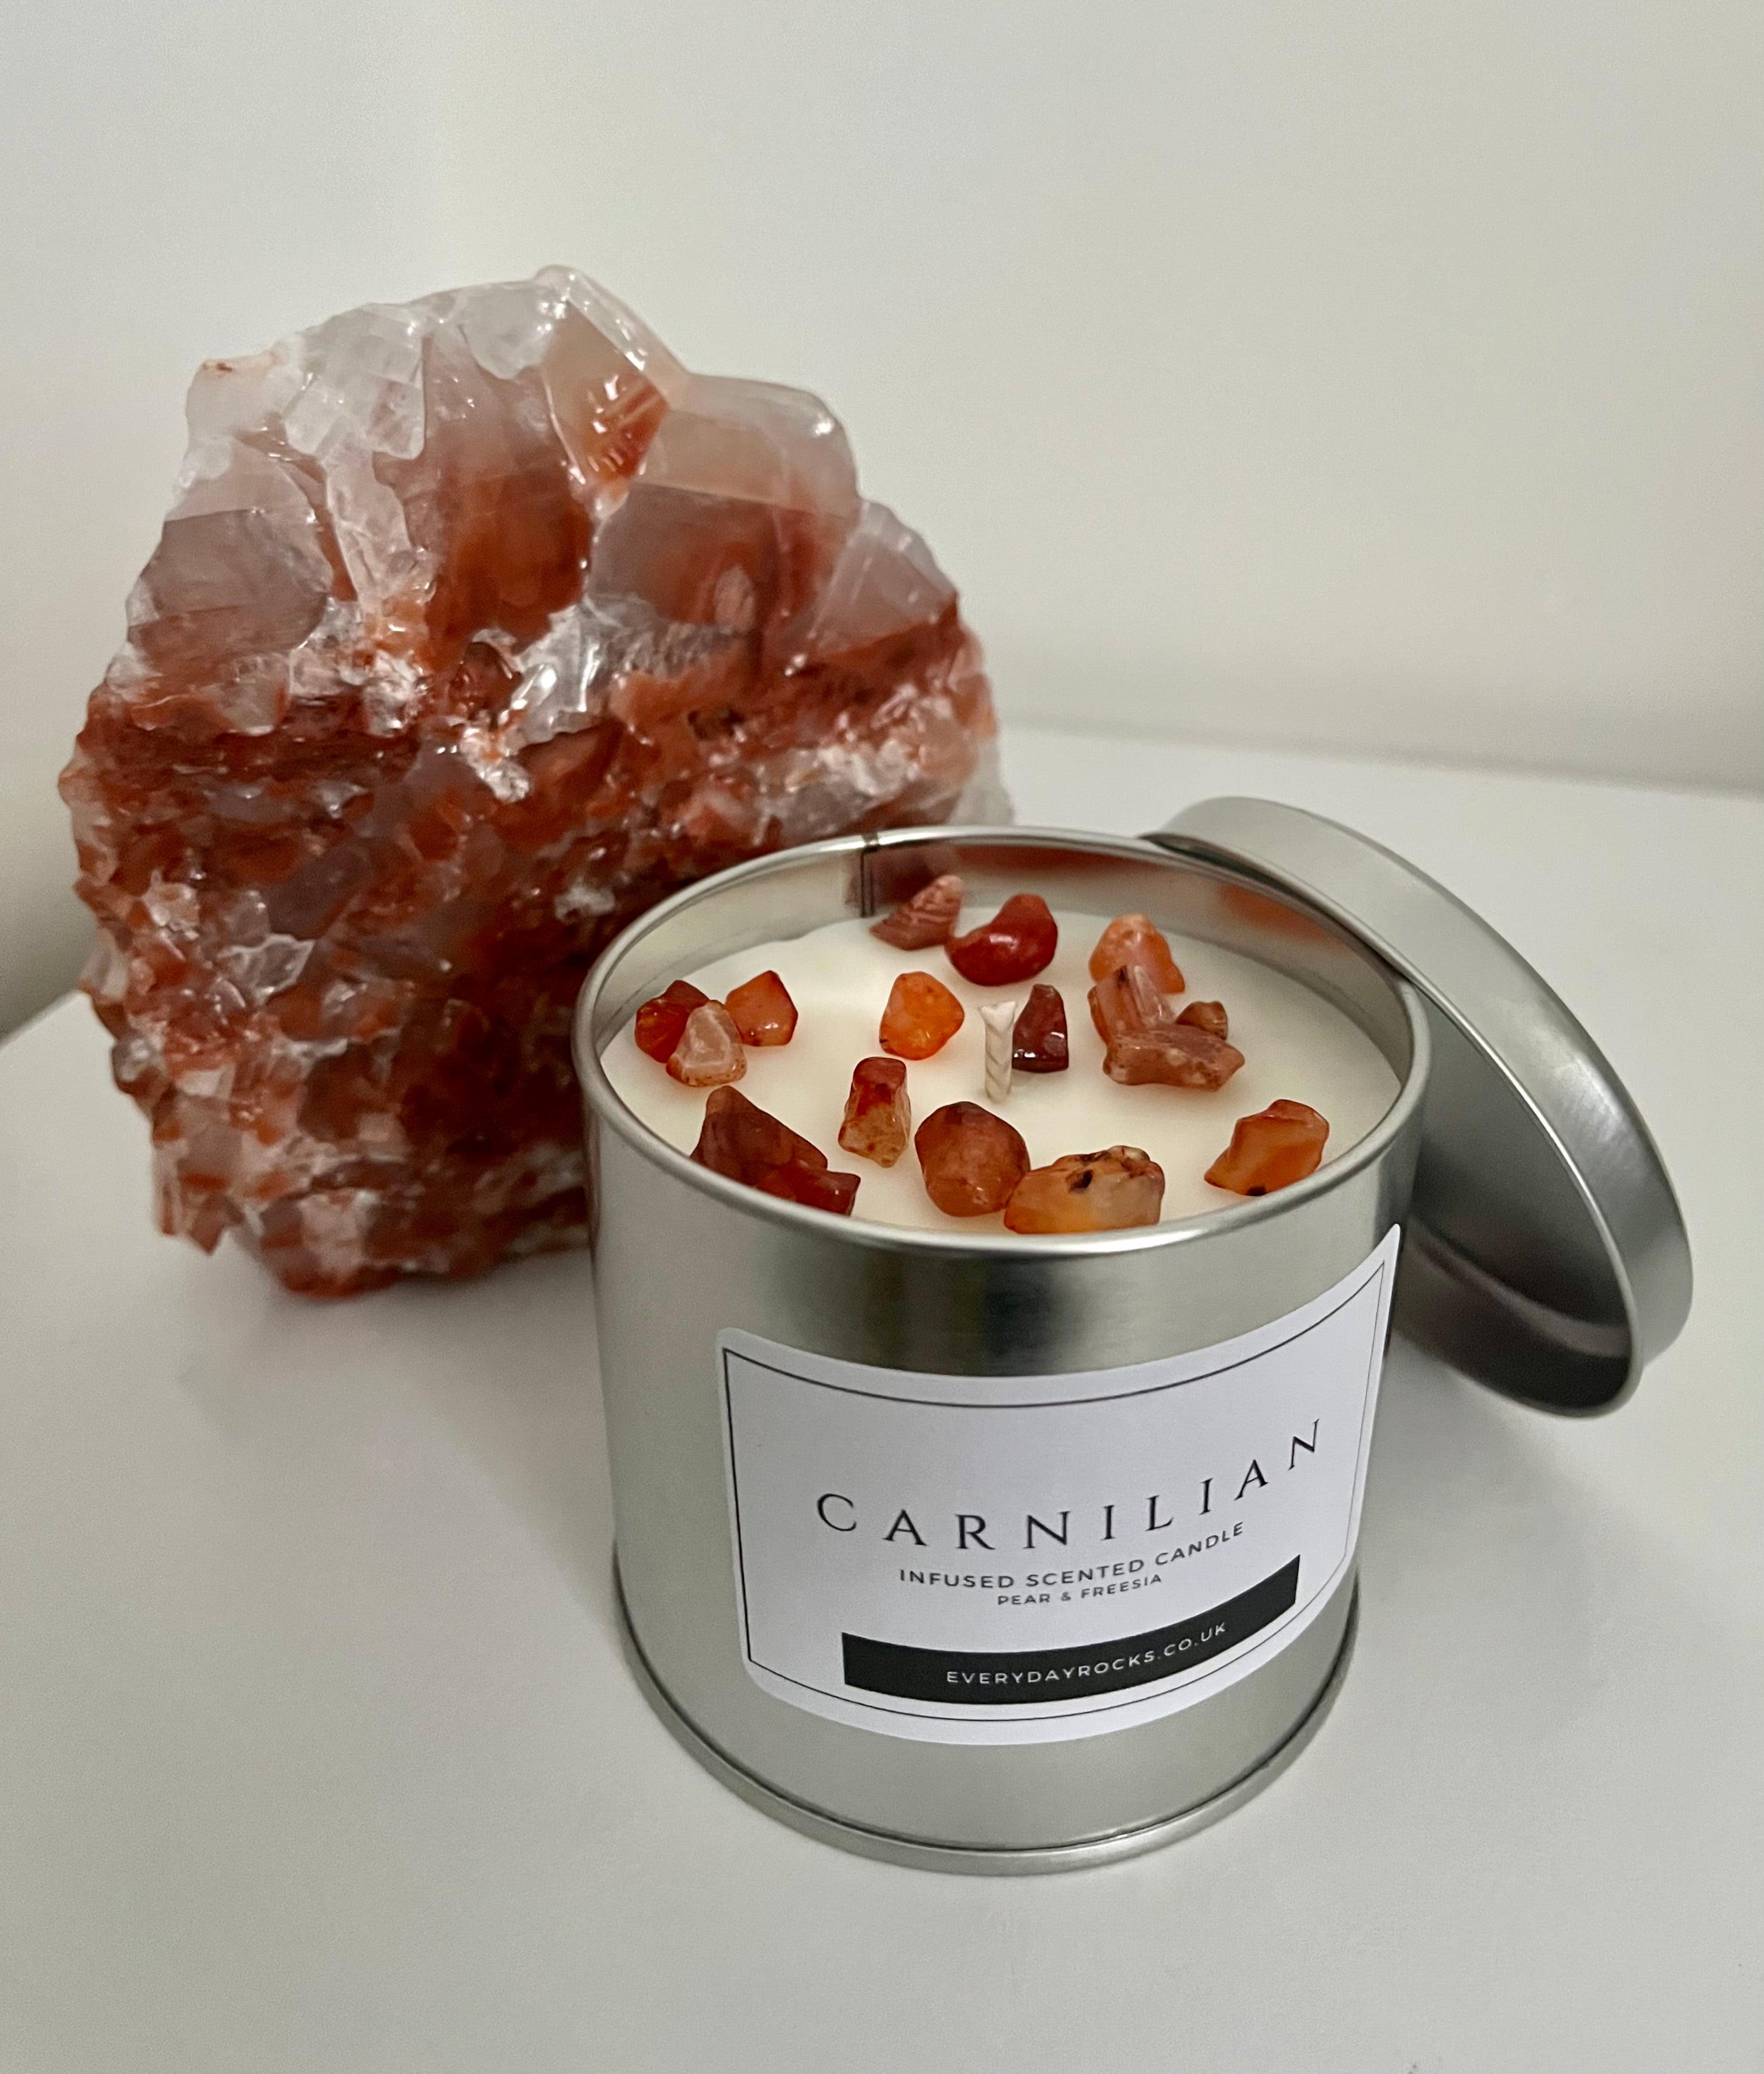 Carnelian Infused Scented Candle - Freesia and Pear Frangrance